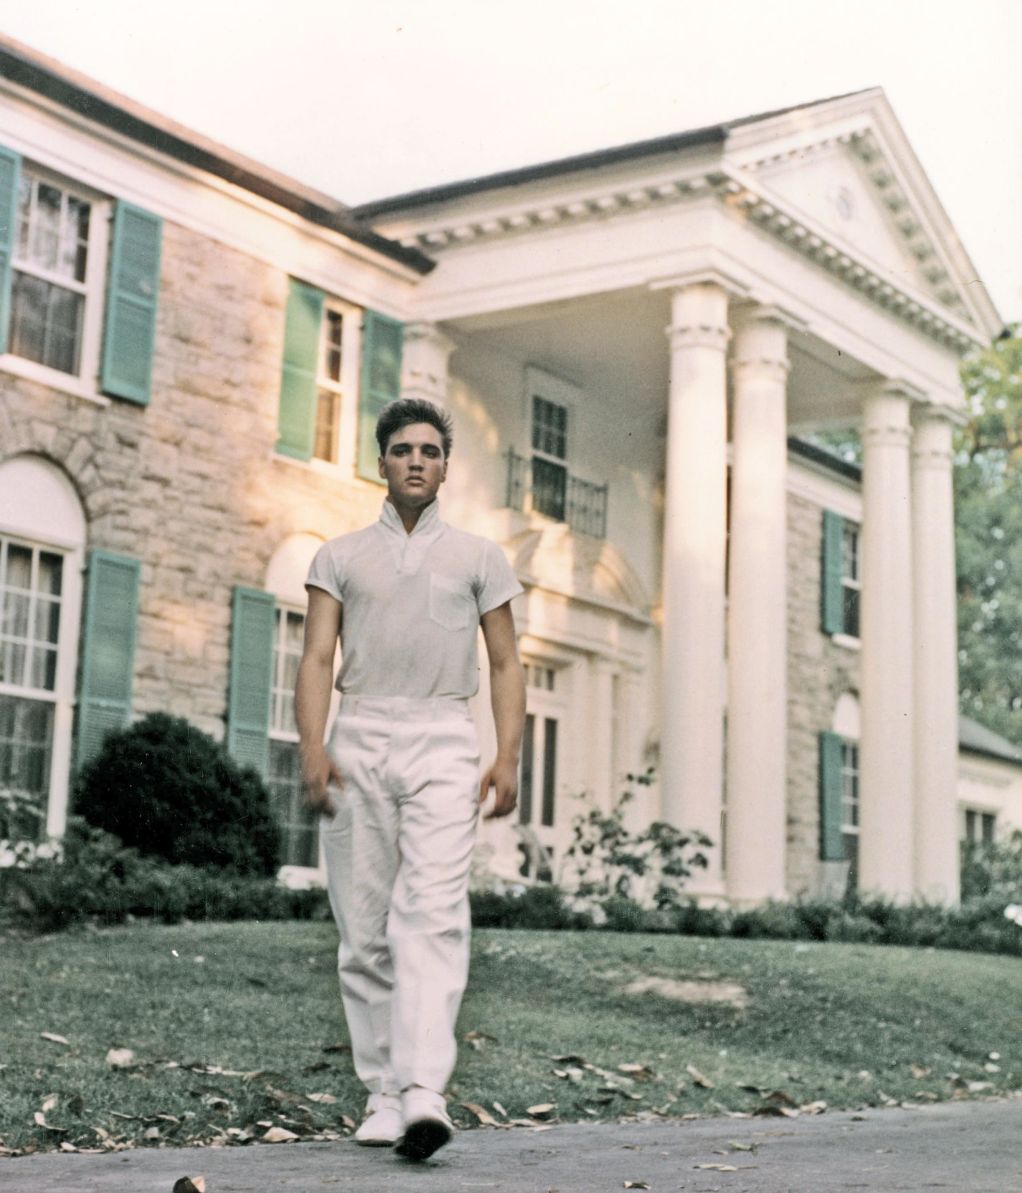 Legal notice states Graceland mansion is set for a foreclosure auction. Pictured is the late Elvis Presley. Photo: Getty Images/Michael Ochs Archives